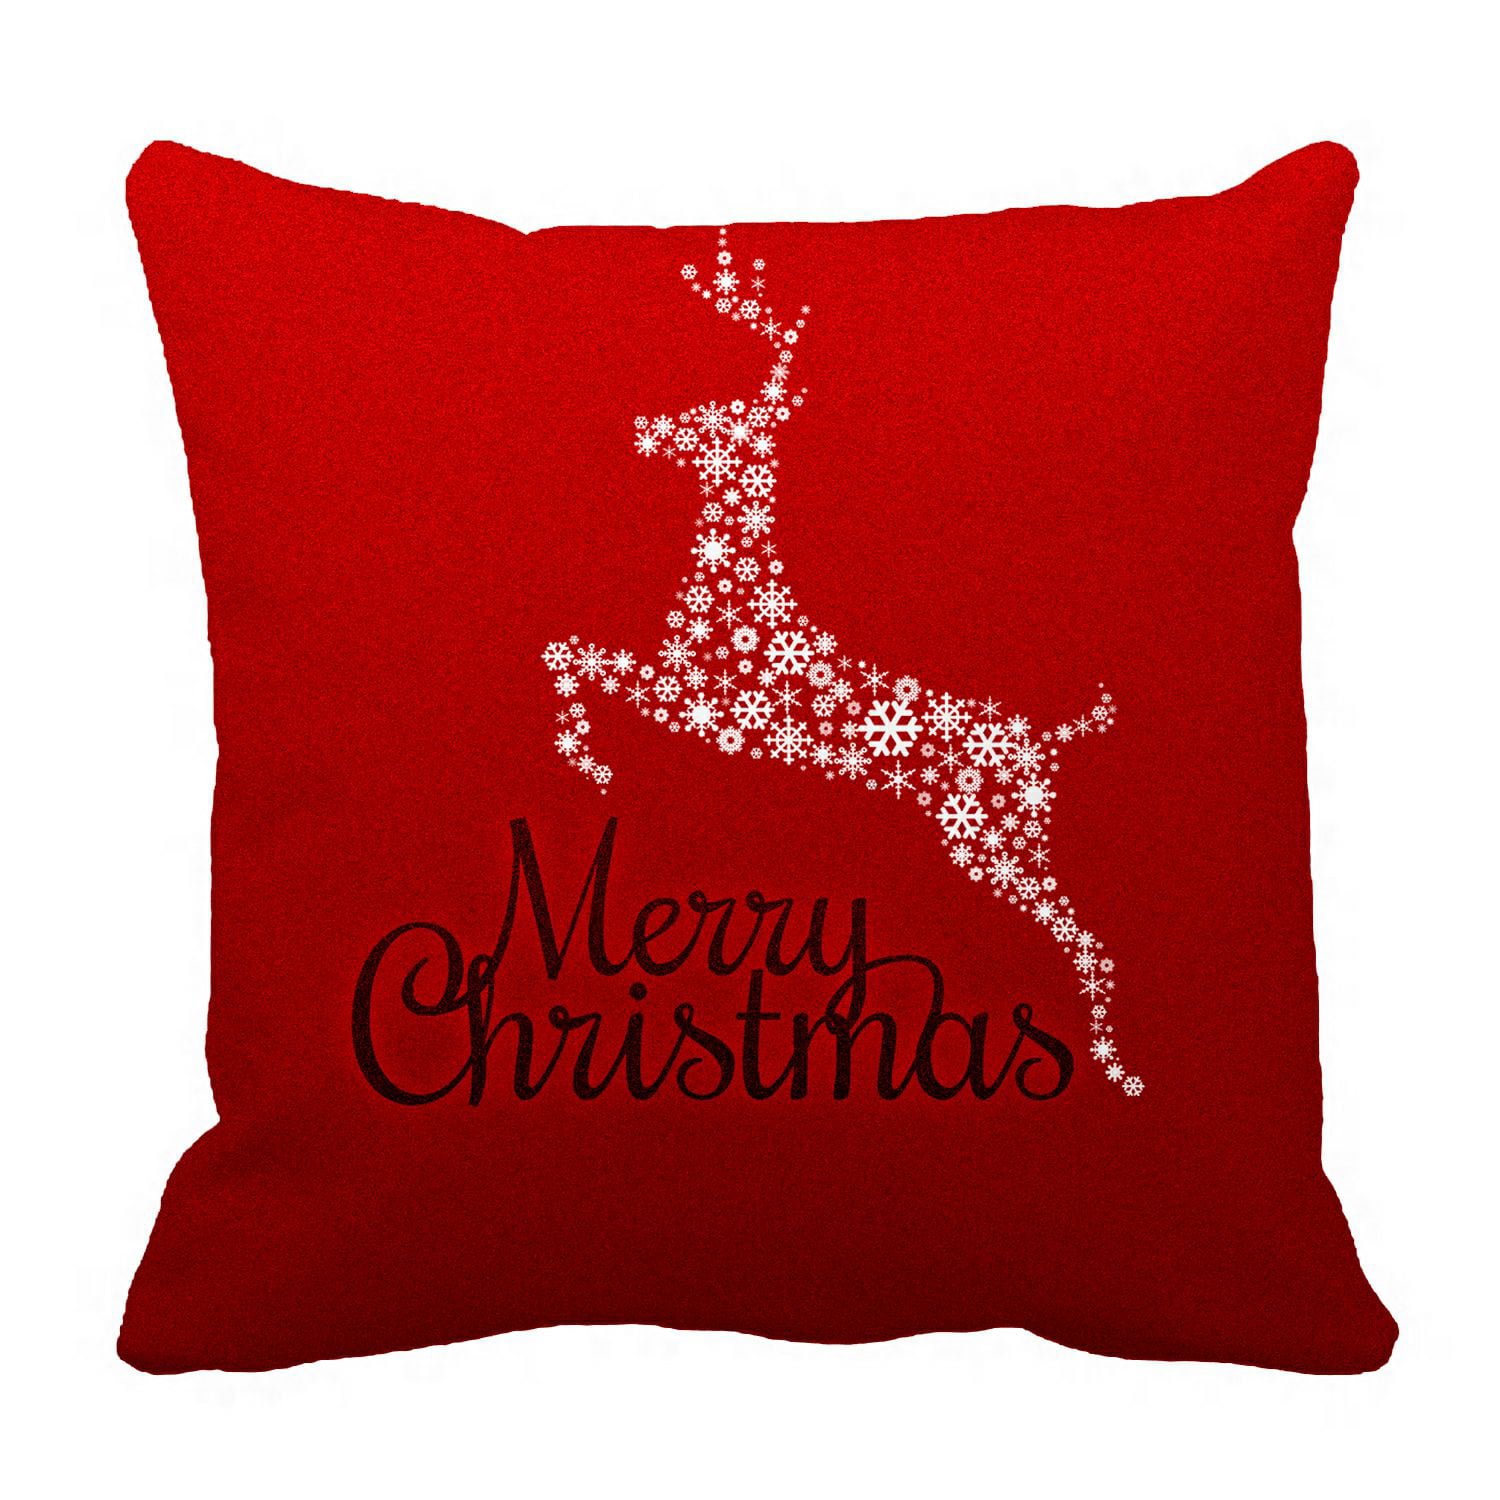 ZKGK Merry Christmas Pillowcase Home Decor Pillow Cover Case Cushion Two Sides 20x20 Inches